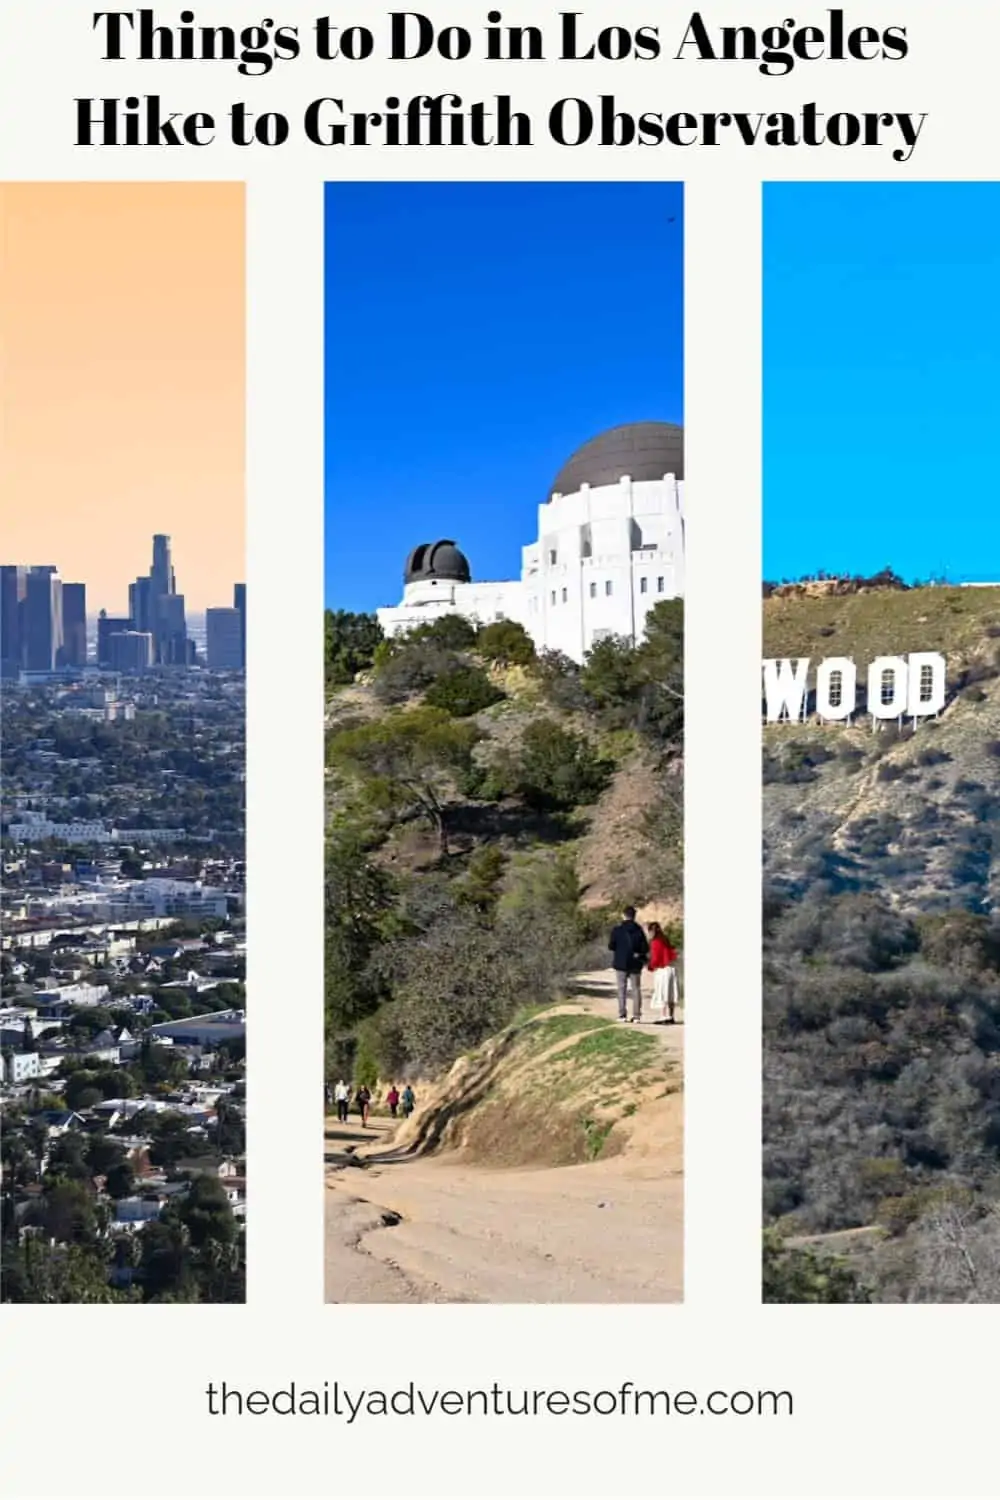 Looking for a great way to spend the day in Los Angeles? Consider communing with nature with a hike up to Griffith Observatory then enjoying the free museum.#thingstodoinLA #CaliforniaHikes #GriffithPark